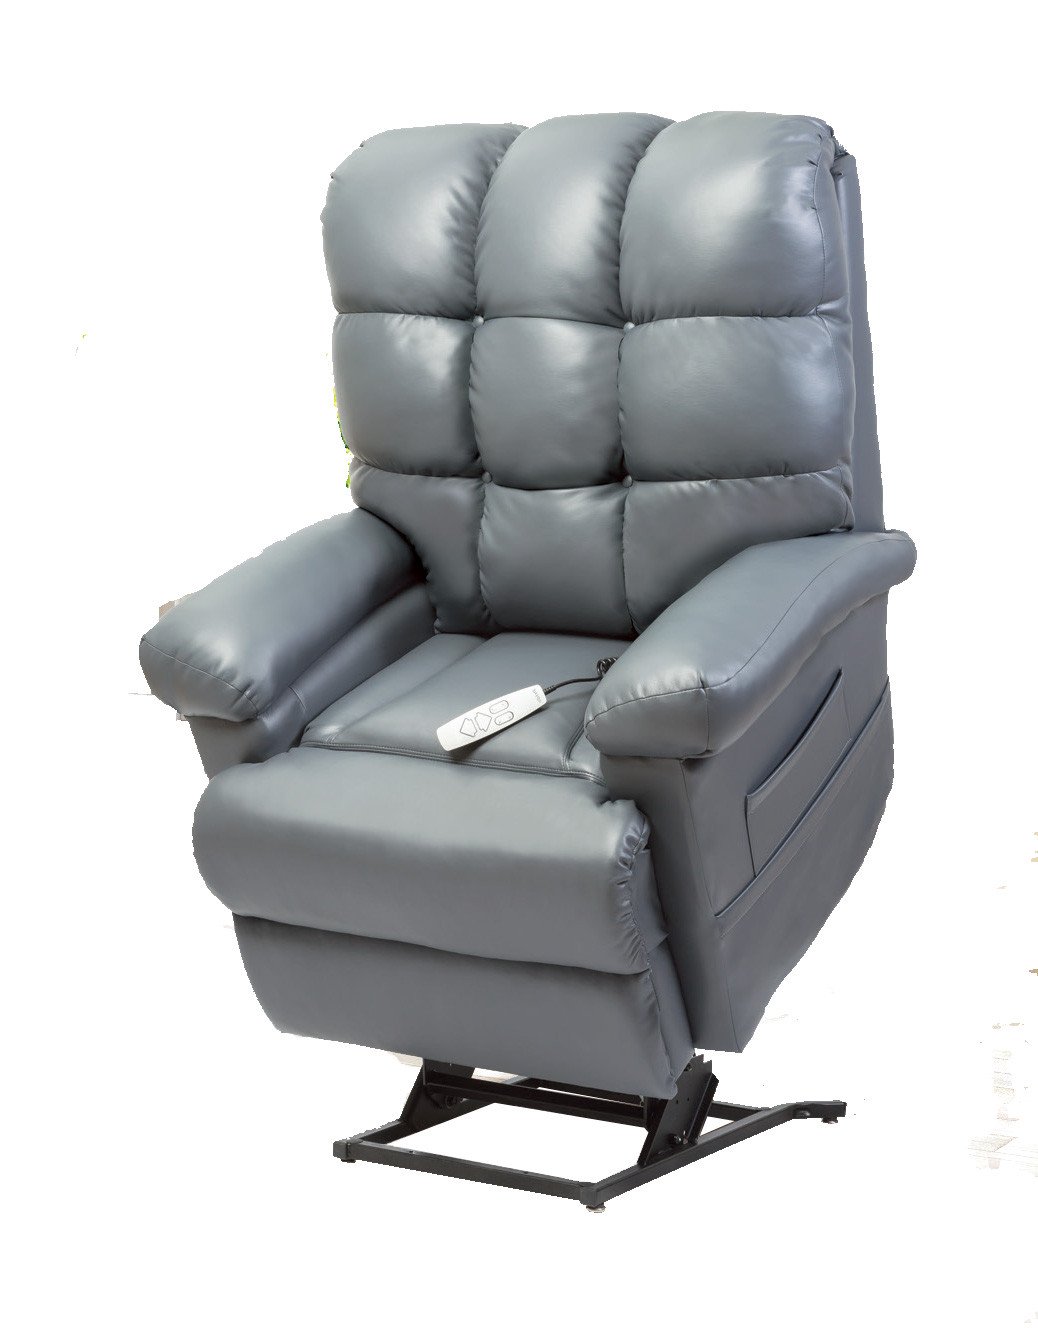 Pride Oasis Collection Infinite Position Power Lift Recliner LC-580i Ultraleather™ Charcoal fabric